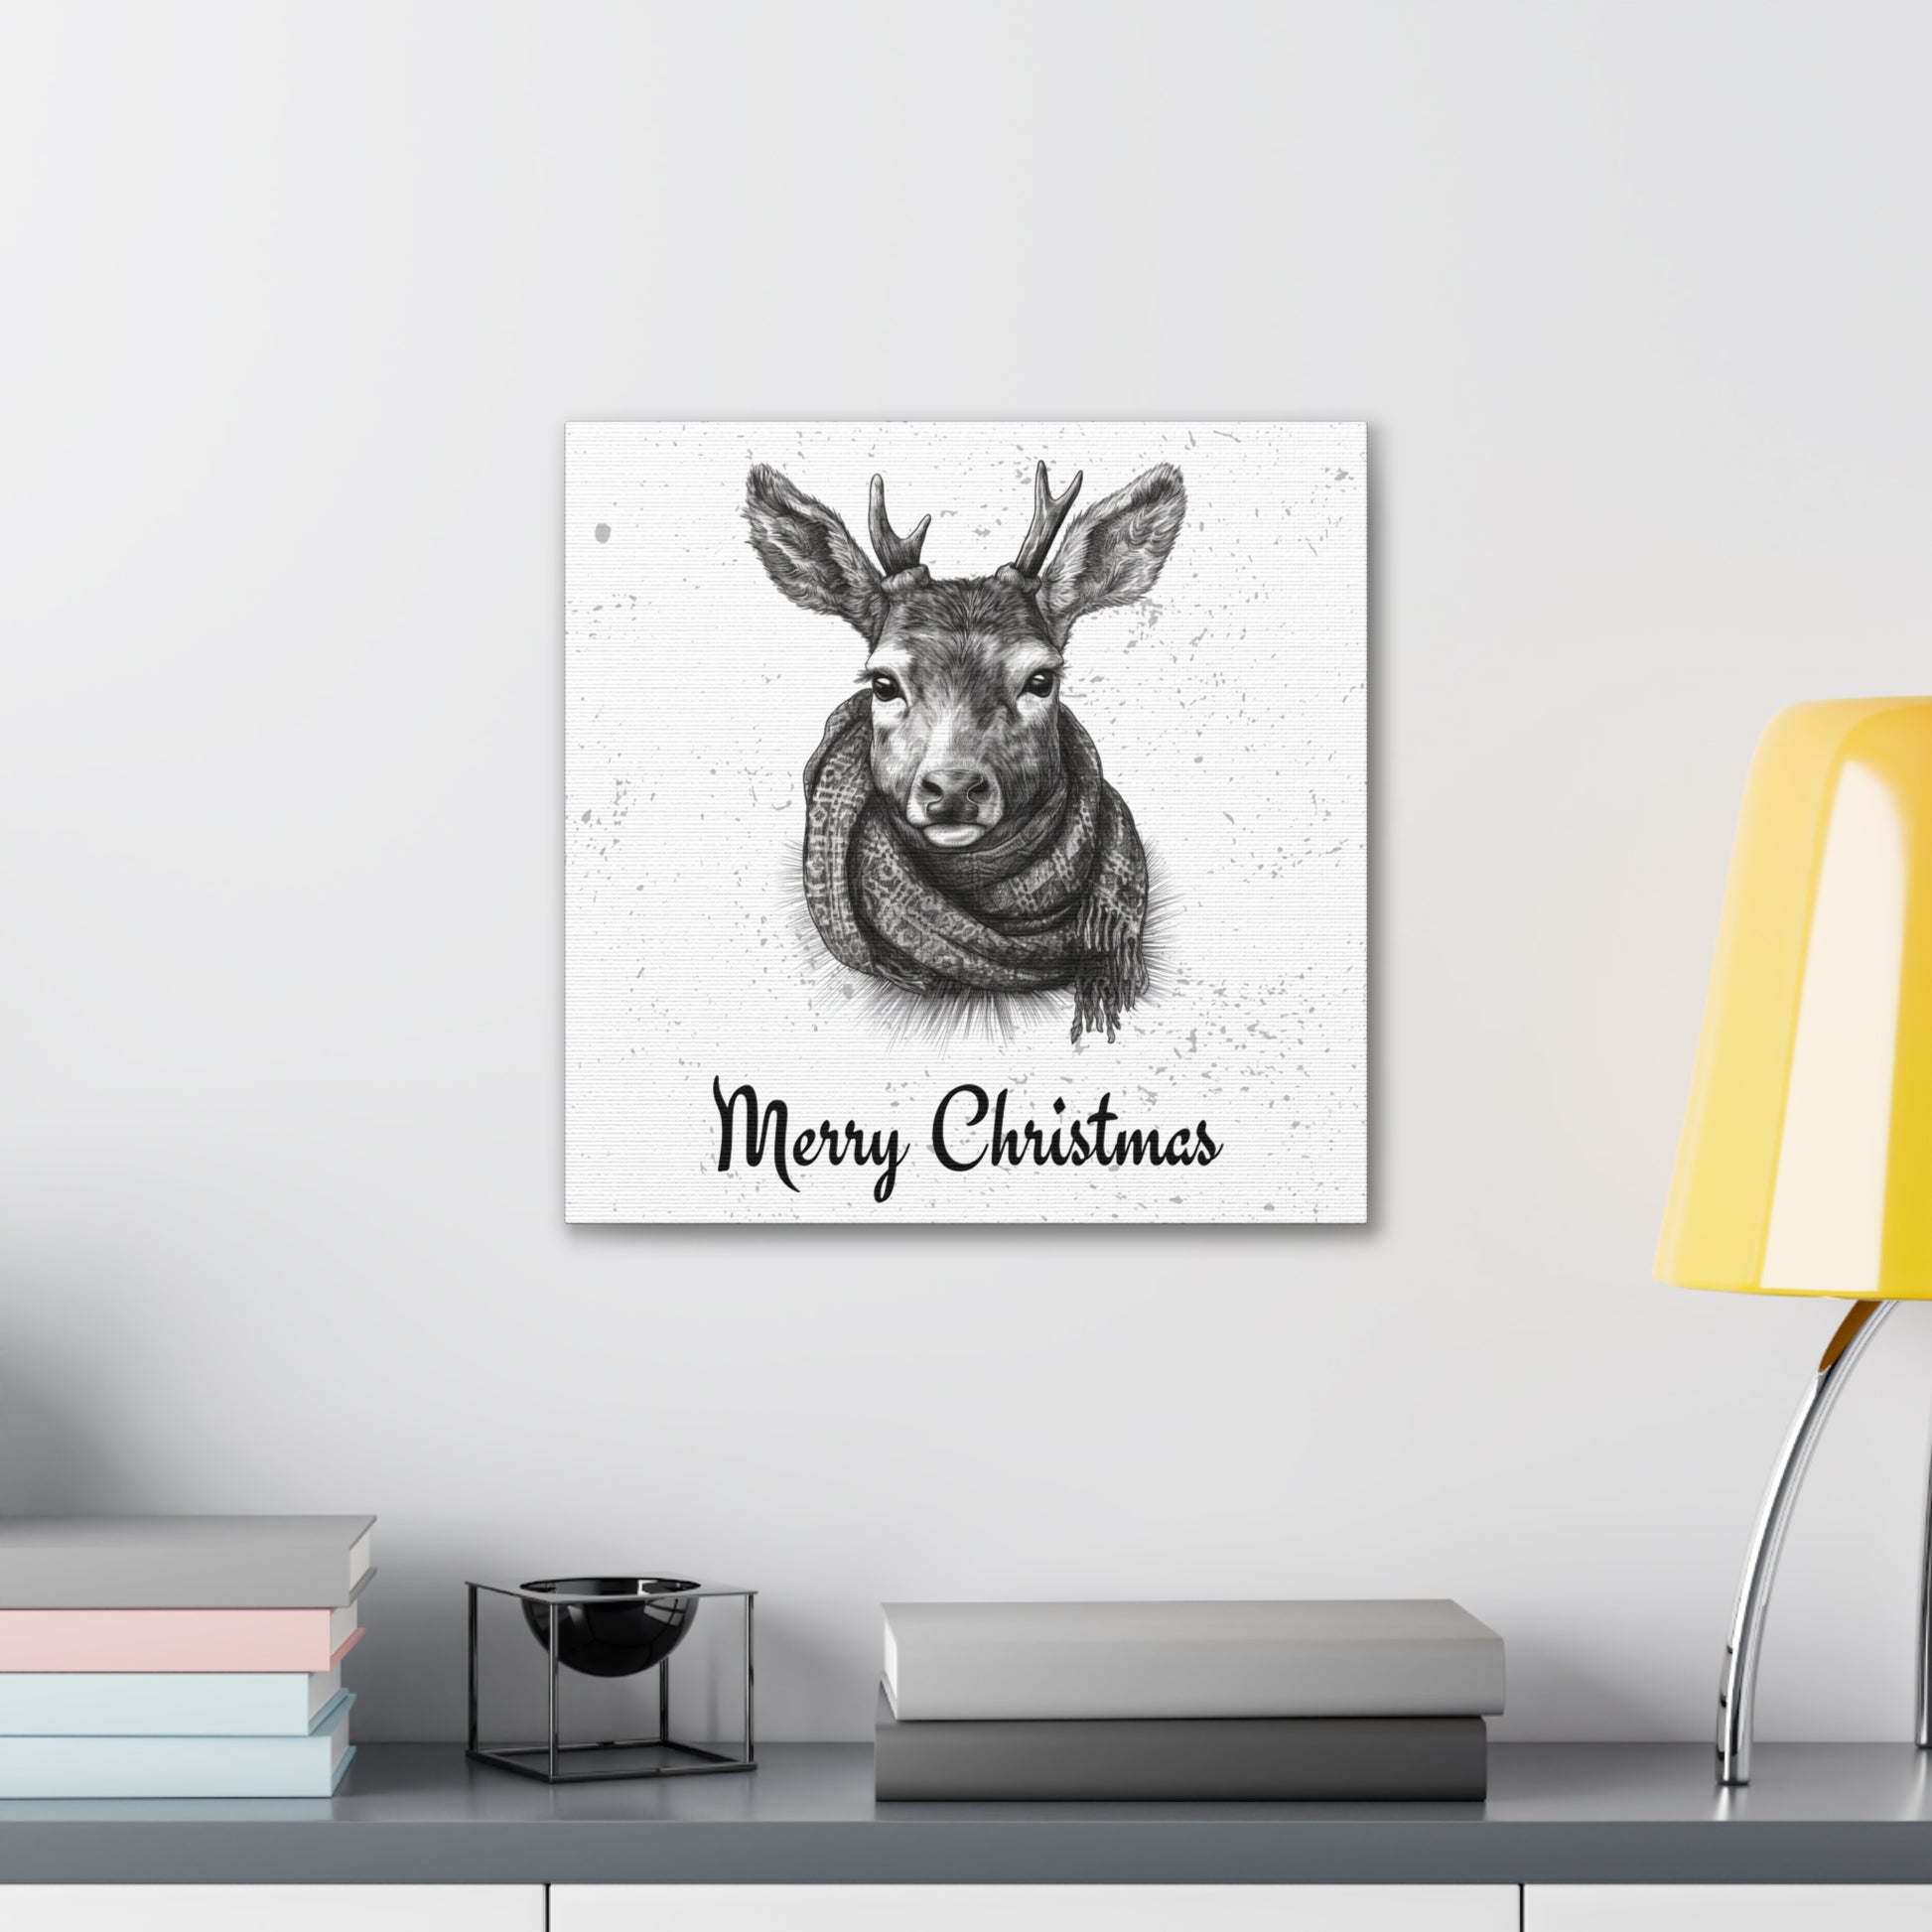 "Merry Christmas" Wall Art - Weave Got Gifts - Unique Gifts You Won’t Find Anywhere Else!